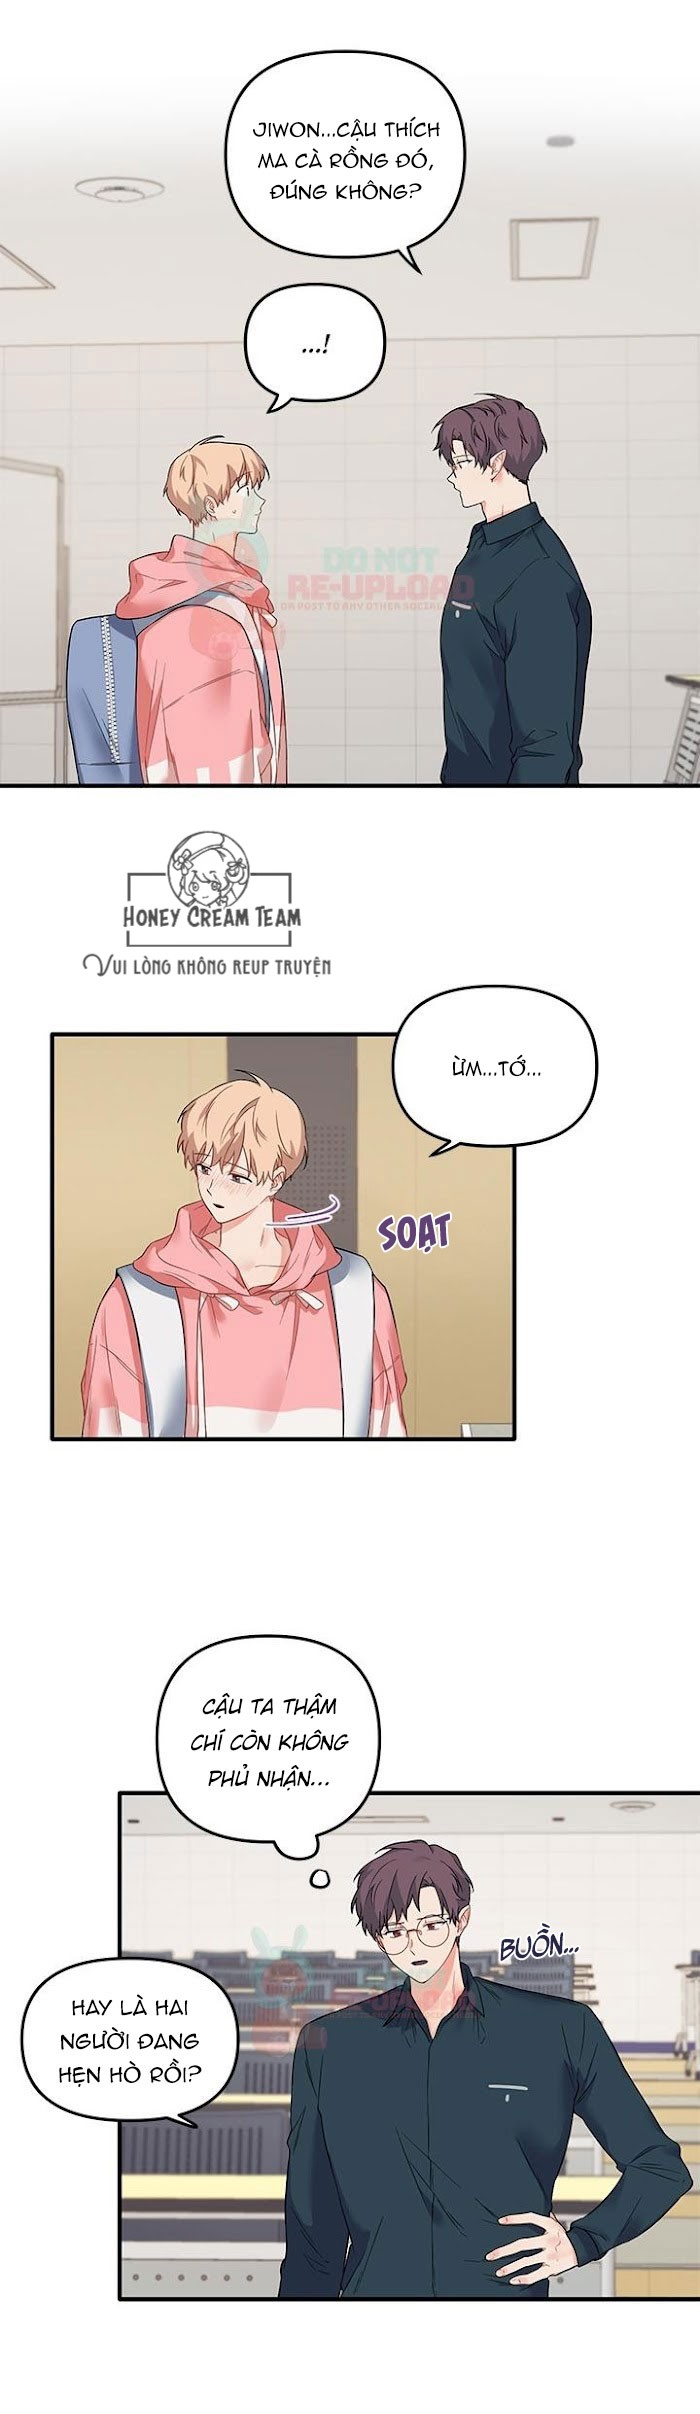 blood-and-love-chap-21-26